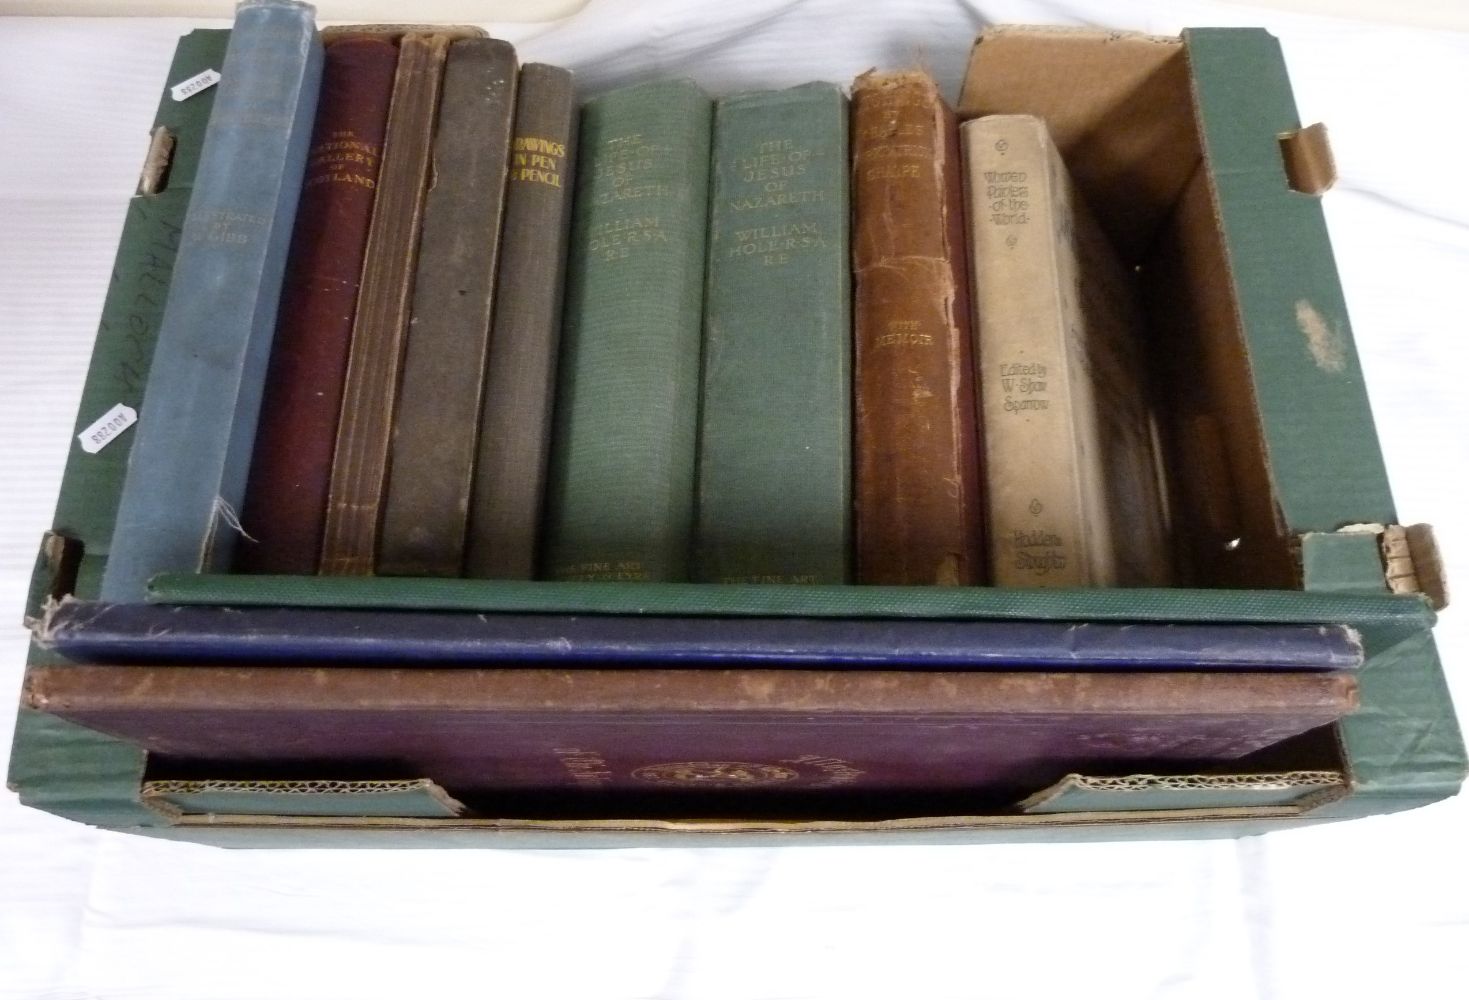 CARLISLE. Antiquarian and Collectable Books.